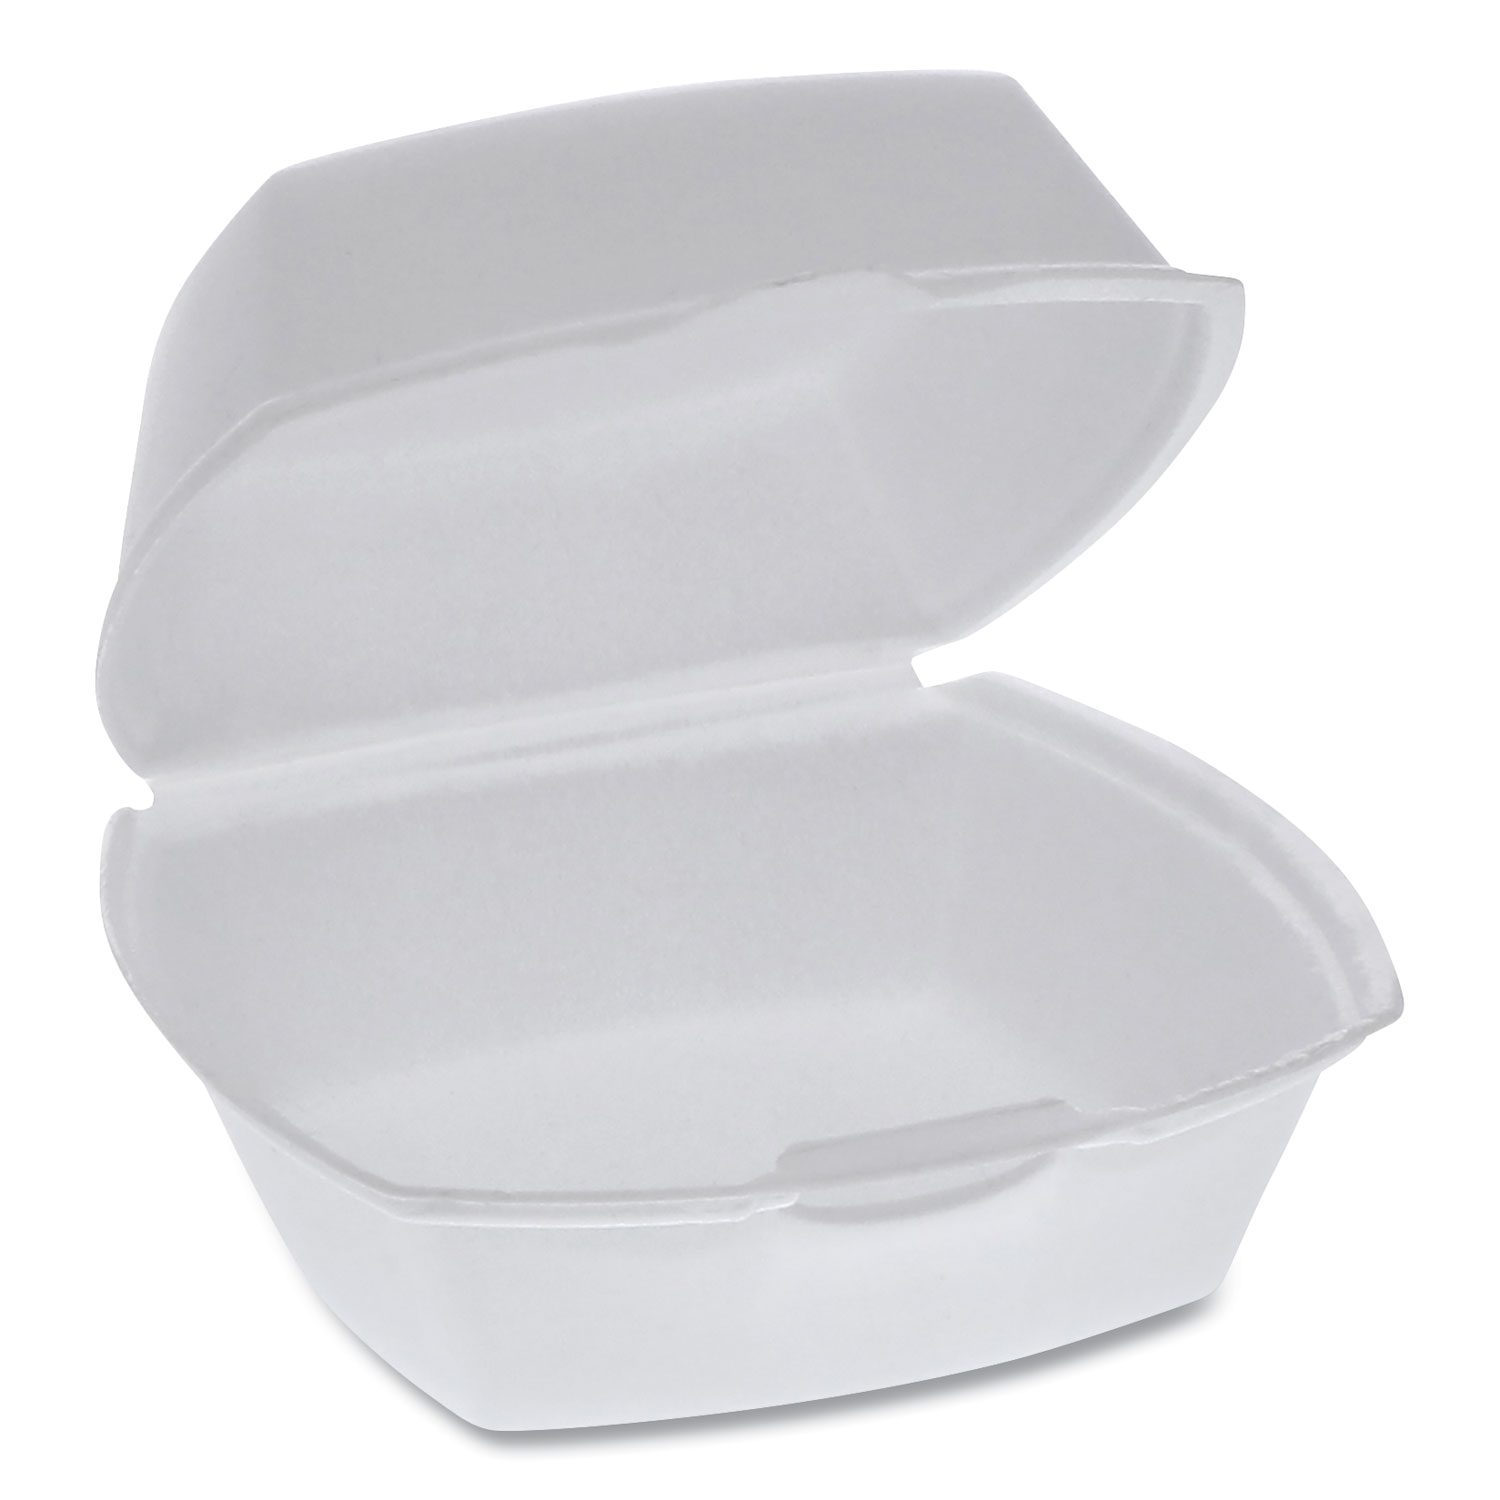  Pactiv YTH100790000 Foam Hinged Lid Containers, Single Tab Lock, 5.13 x 5.13 x 2.5, 1-Compartment, White, 500/Carton (PCTYTH100790000) 